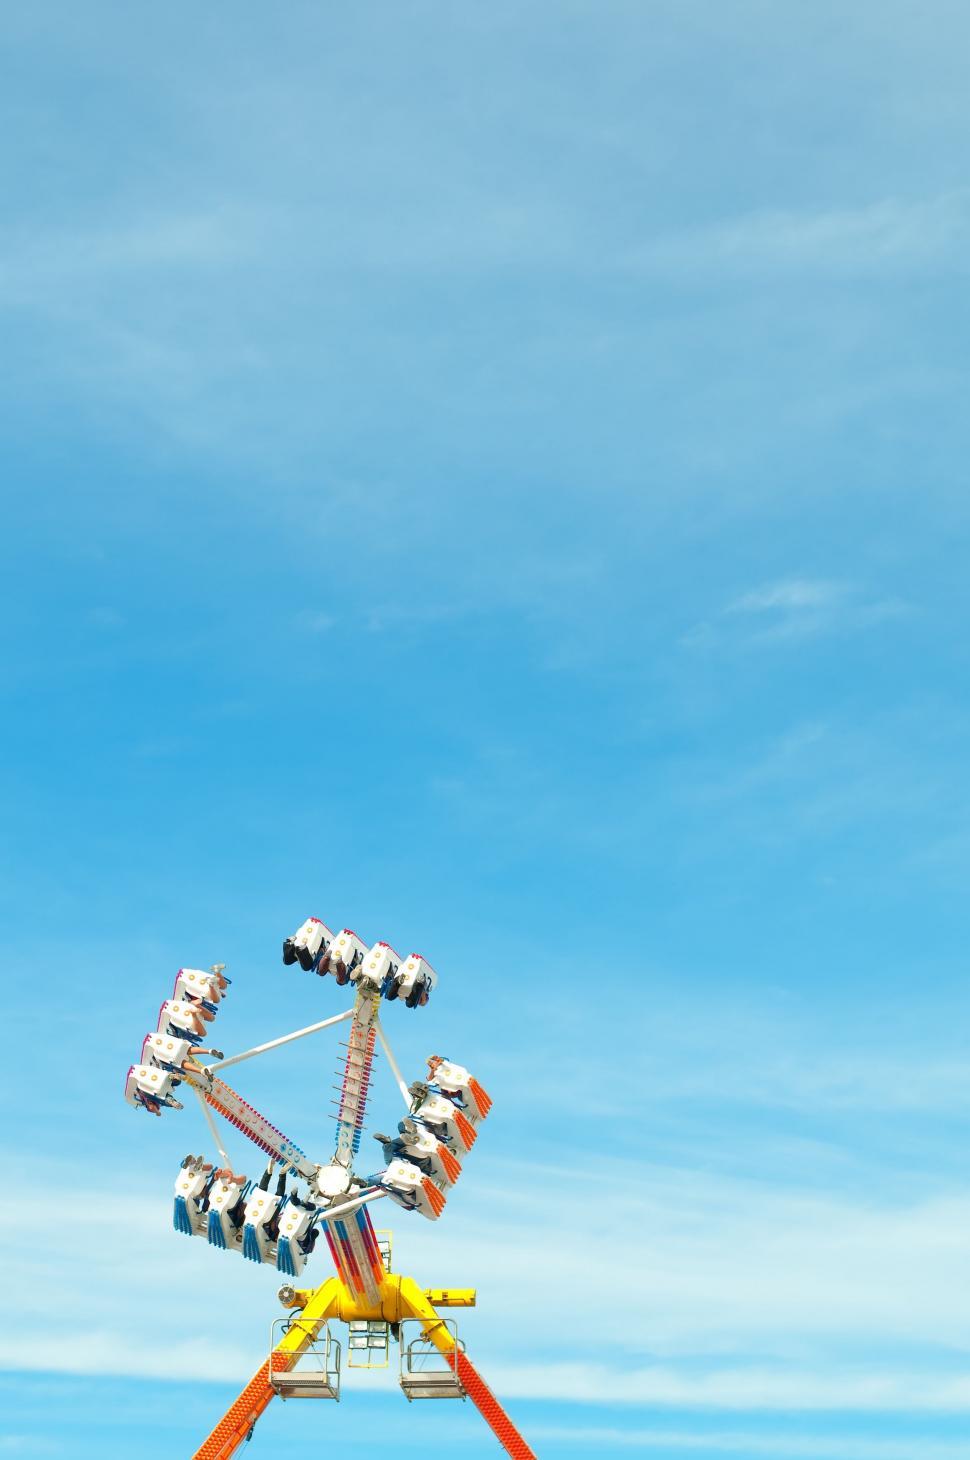 Free Image of Ferris Wheel in the Middle of a Blue Sky 